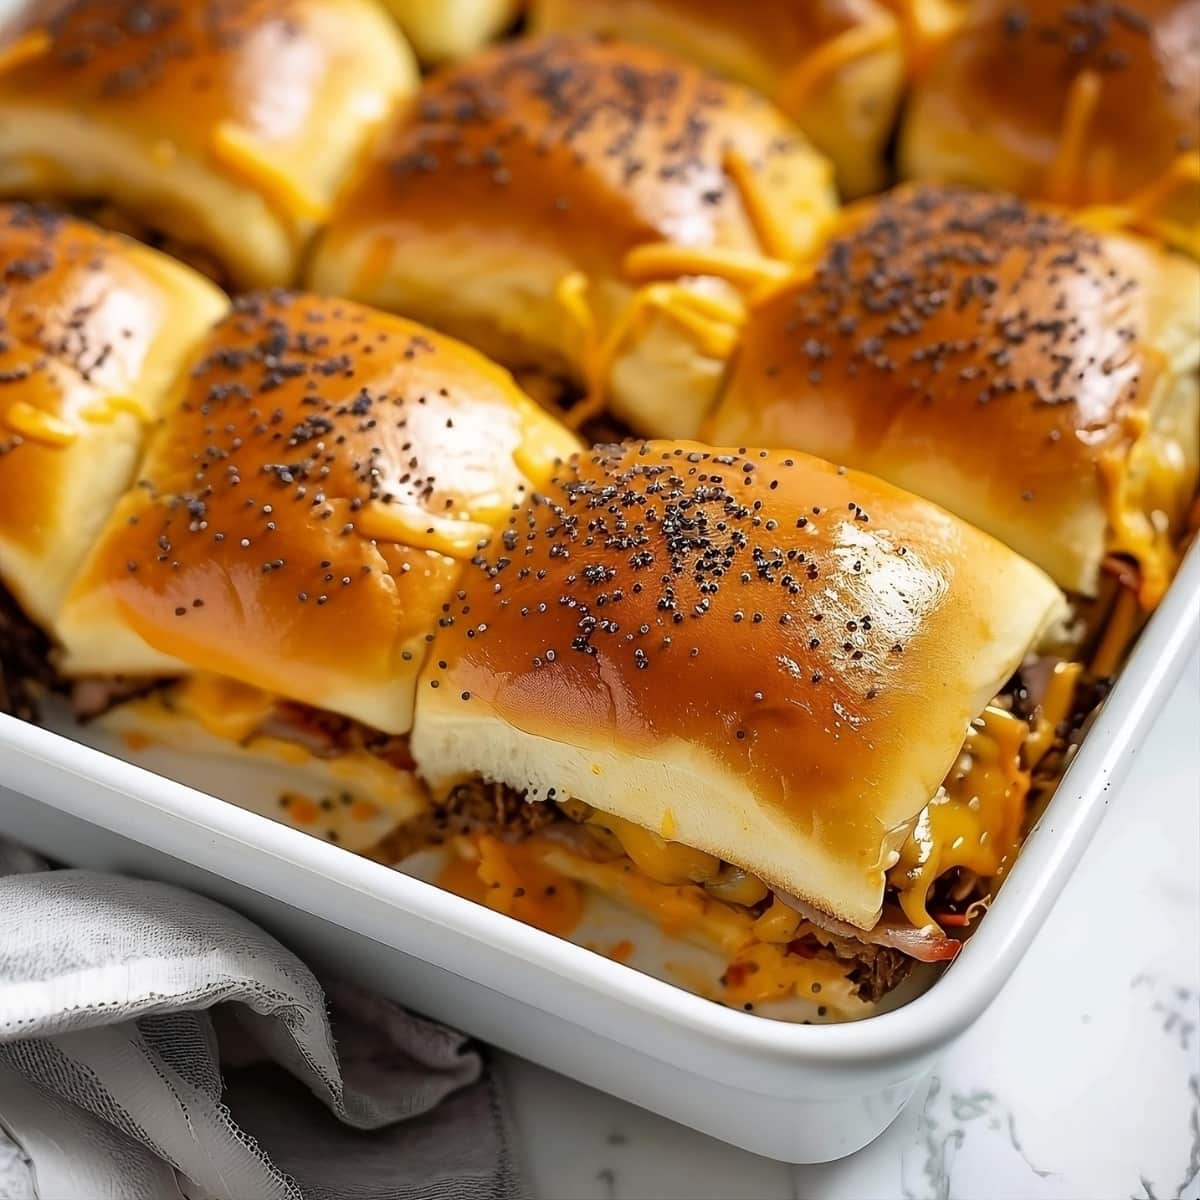 Cheese and beef sliders with poppy seeds on top on a baking dish.